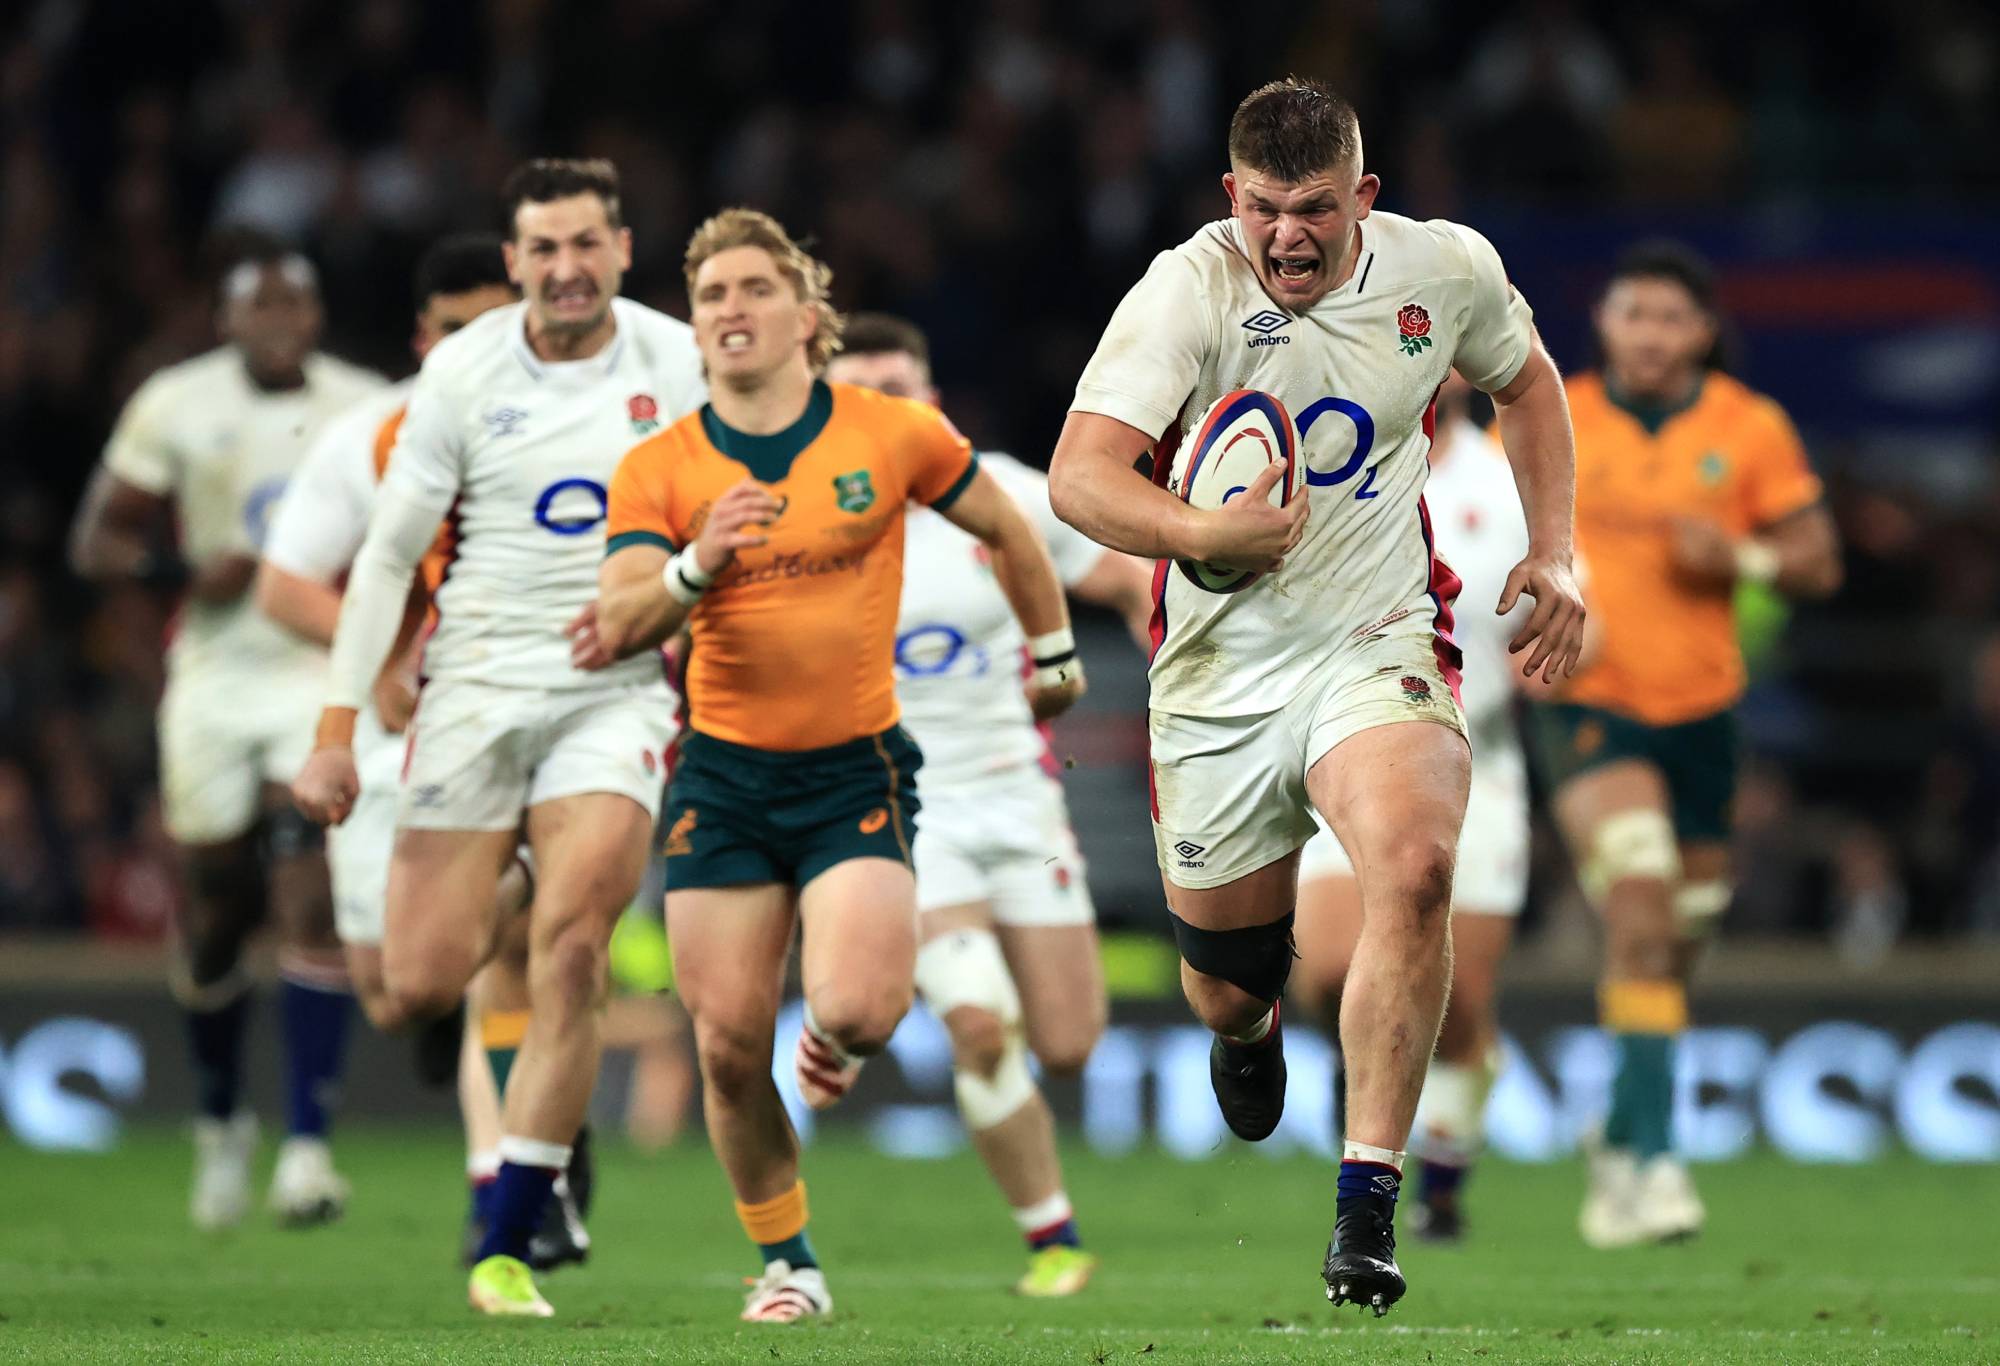 Jamie Blamire of England breaks away to score their side's second try during the Autumn Nations Series match between England and Australia at Twickenham Stadium on November 13, 2021 in London, England. (Photo by David Rogers/Getty Images)